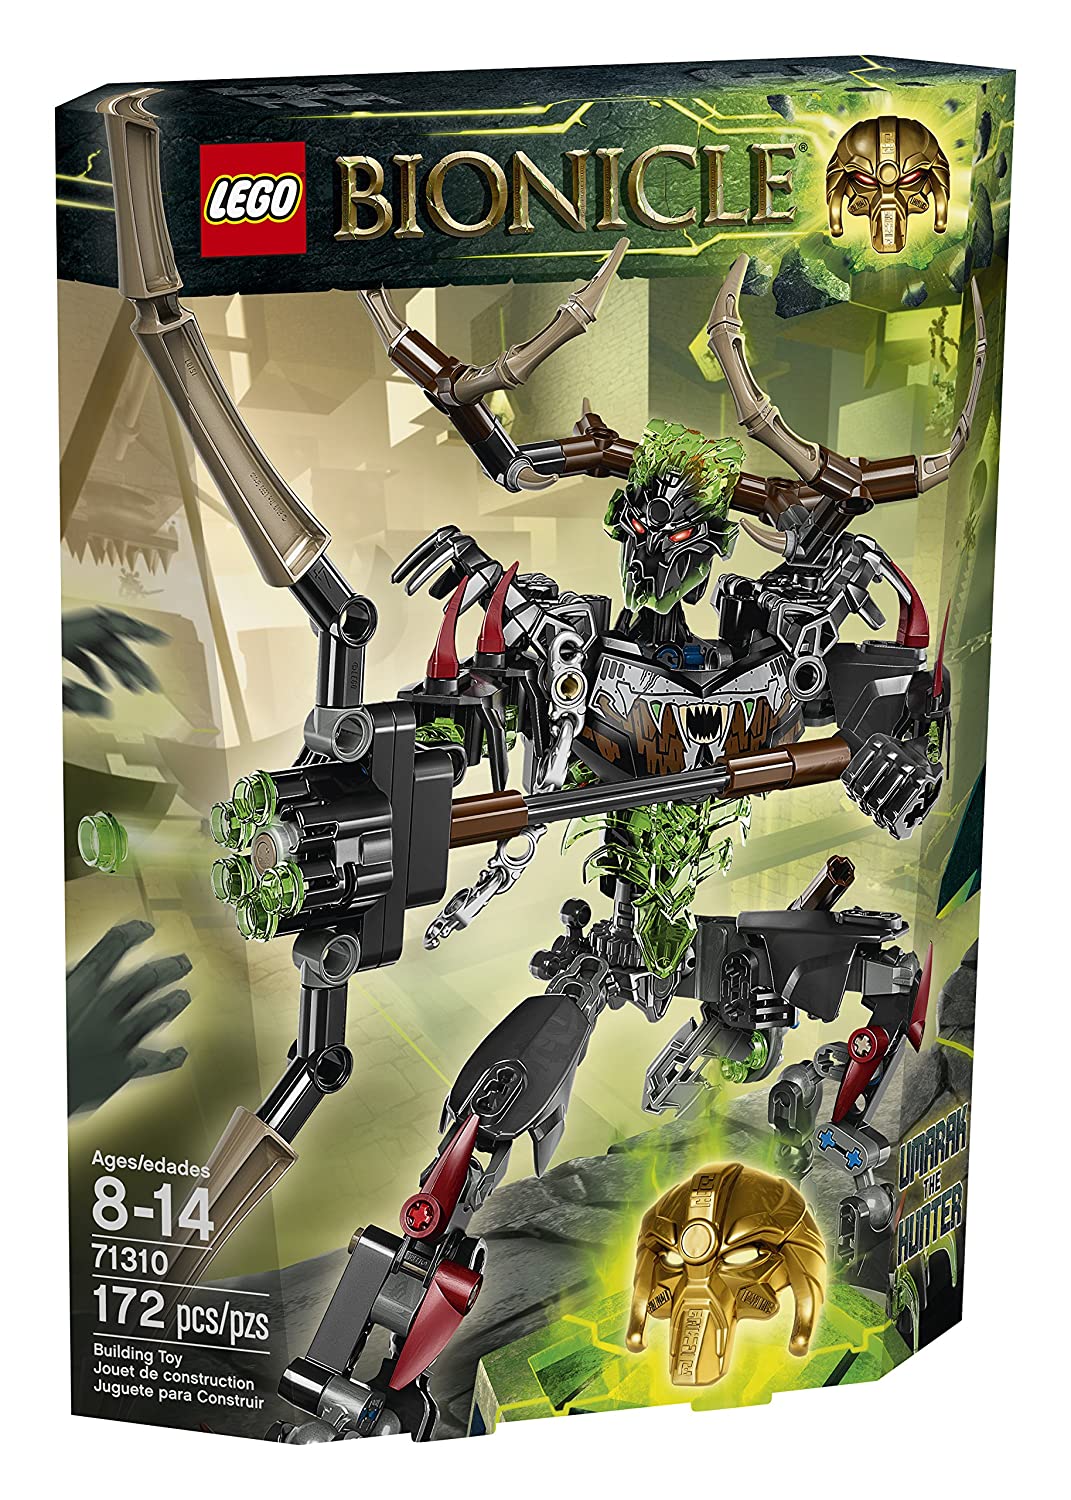 15 Best Lego BIONICLE Sets 2022 - Buying Guide & Reviews 13